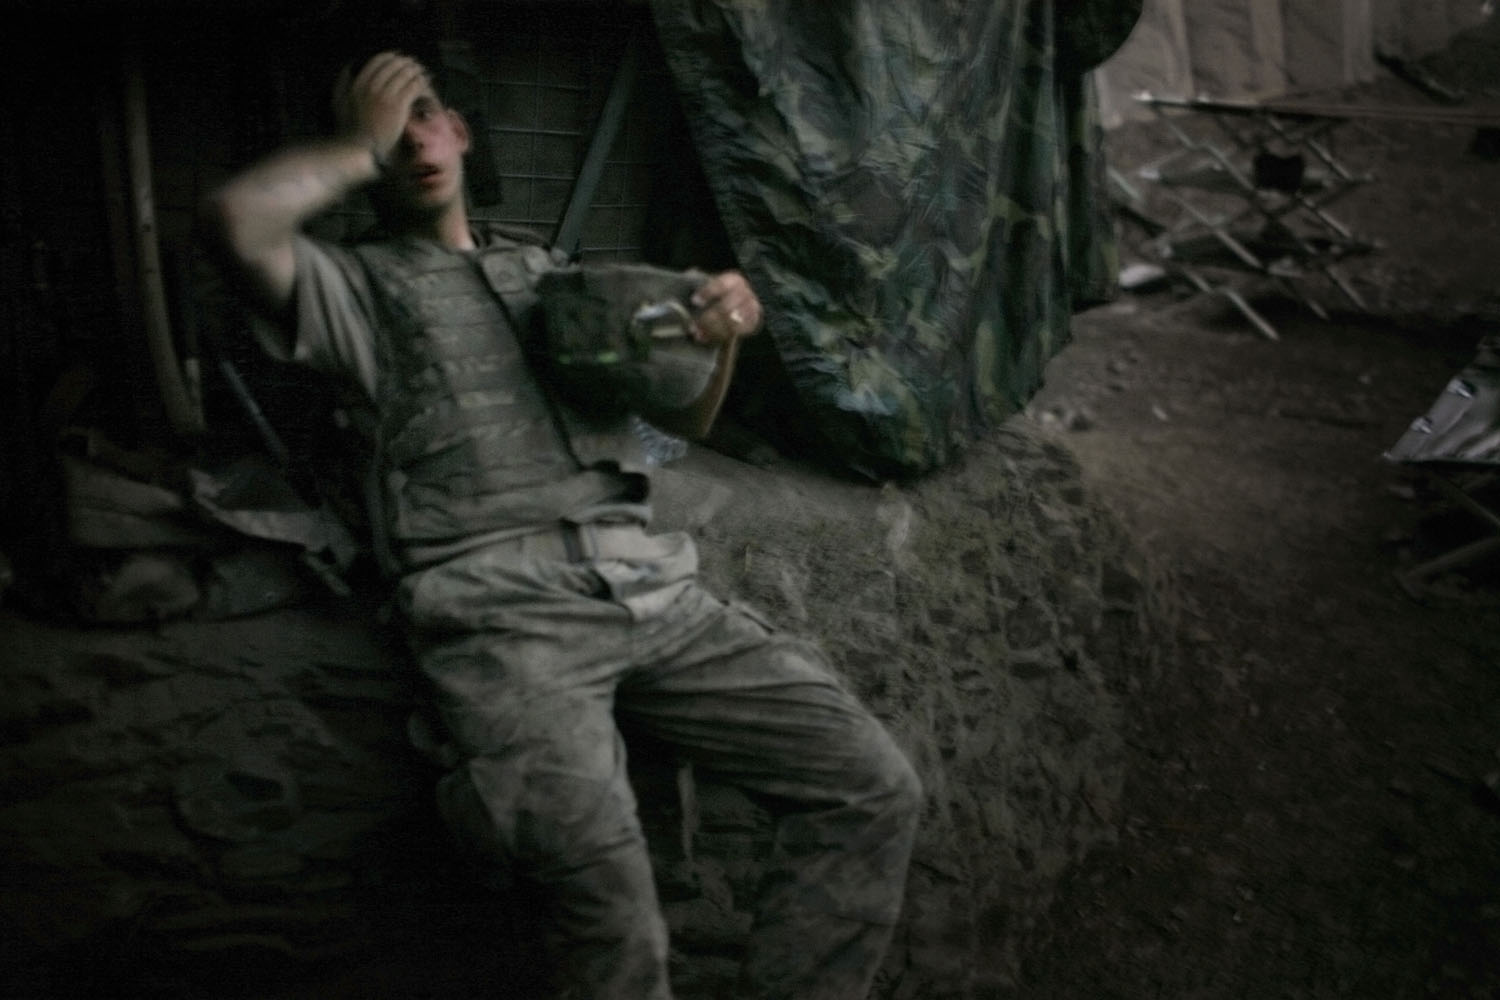 AFGHANISTAN. Korengal Valley. 2007. A soldier from 2nd platoon rests at the end of a day of heavy fighting at the 'Restrepo' outpost. The position was named after the medic Juan Restrepo from 2nd Platoon who was killed by insurgents in July 2007.